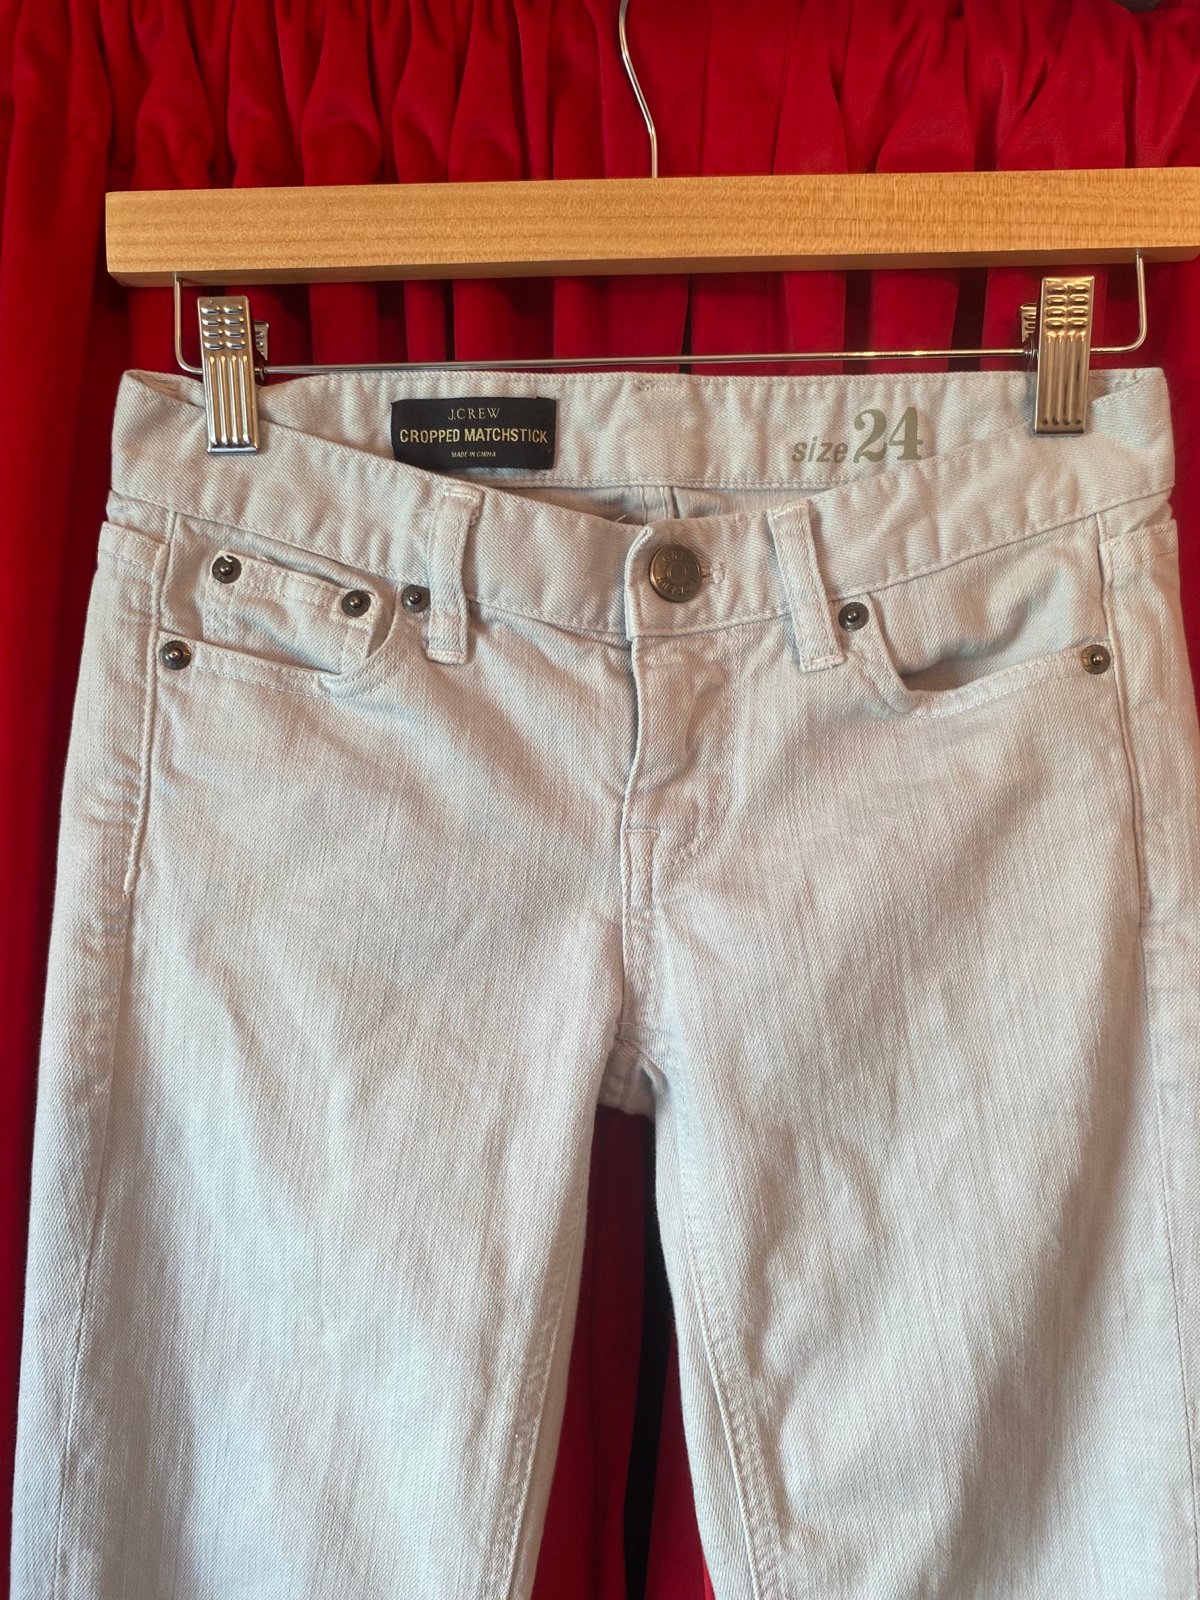 reasonable price J CREW GRAY MATCHSTICK SKINNY CROPPED JEANS 00/24 nuLlaU3t8 hot sale